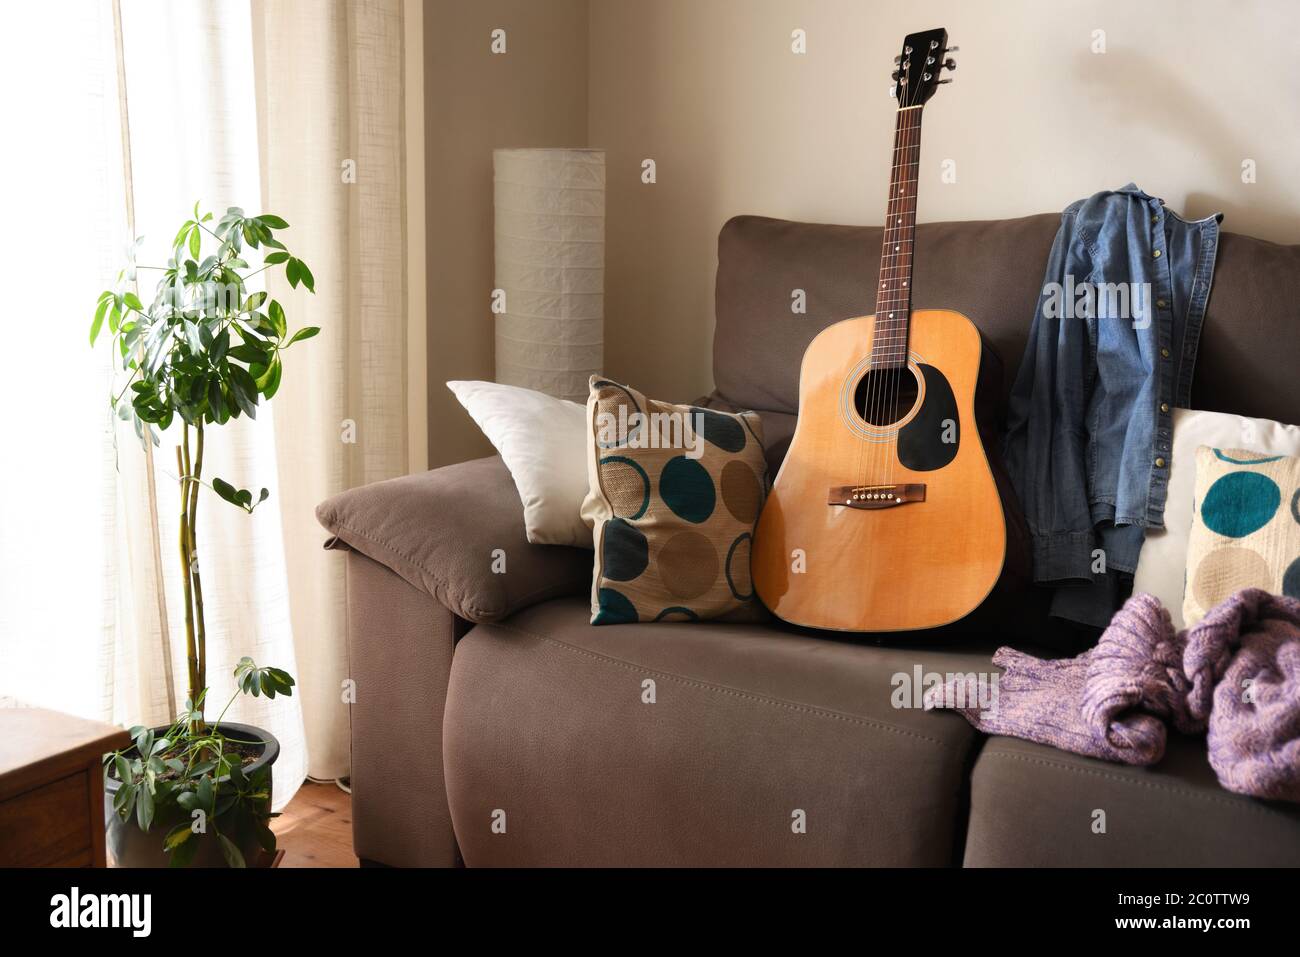 Room with an acoustic guitar on a sofa in a warm environment Stock Photo